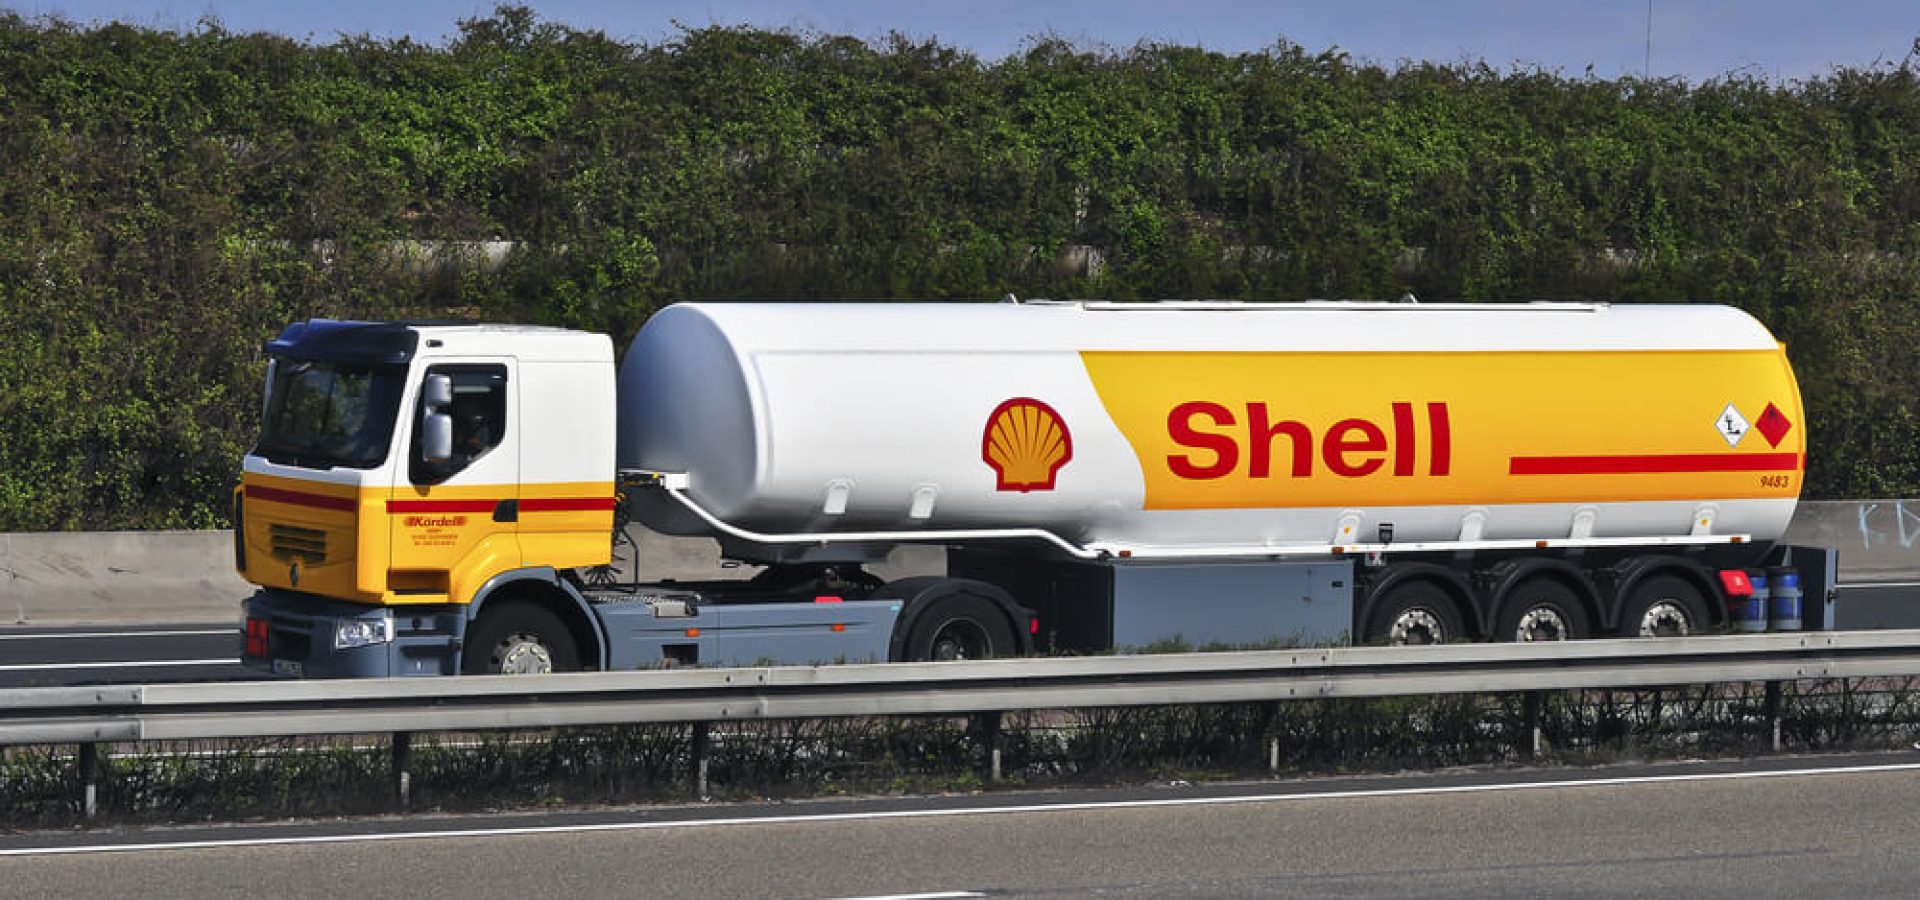 Shell oil truck on the highway.